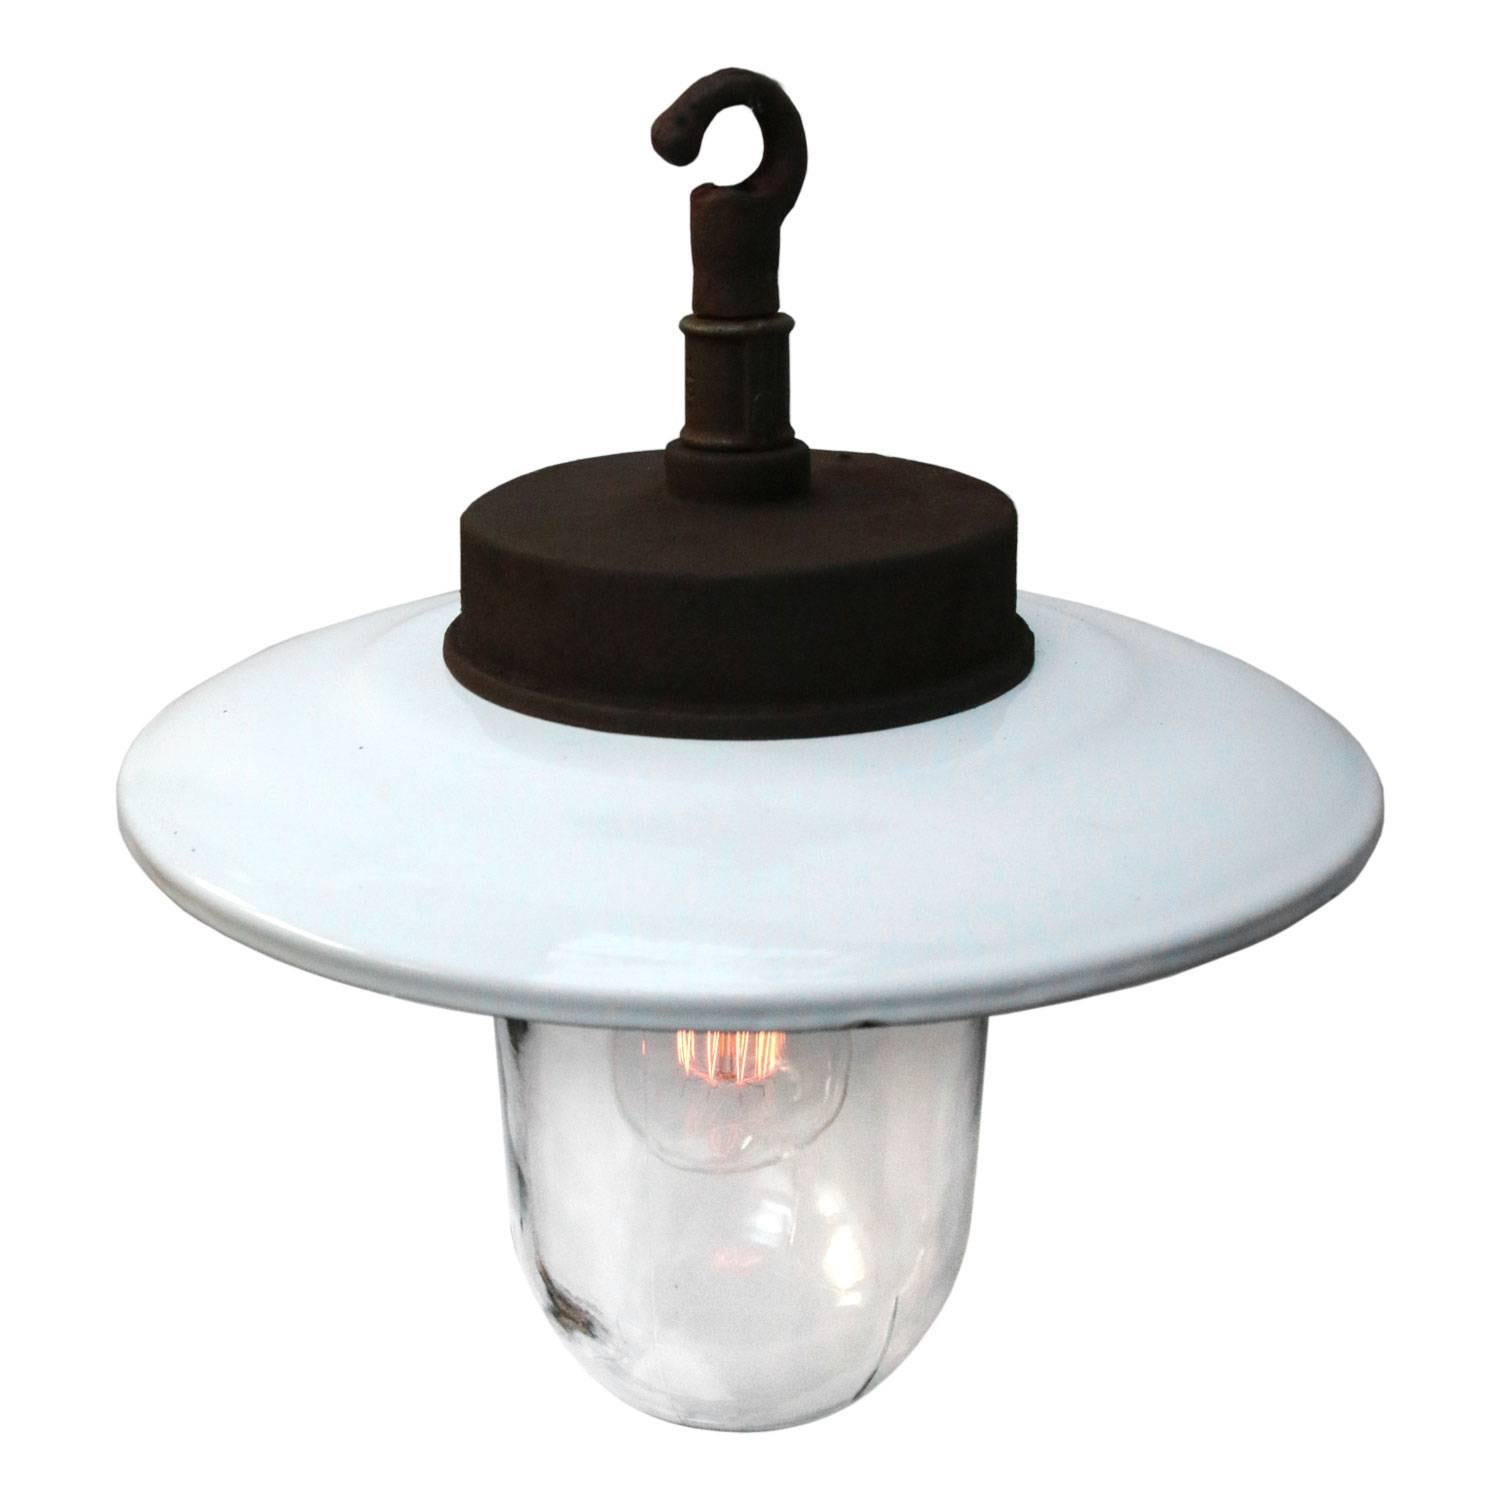 Industrial factory pendant. White enamel shade. Cast iron top. Clear glass.

Weight: 3.0 kg / 6.6 lb

All lamps have been made suitable by international standards for incandescent light bulbs, energy-efficient and LED bulbs. E26/E27 bulb holders and